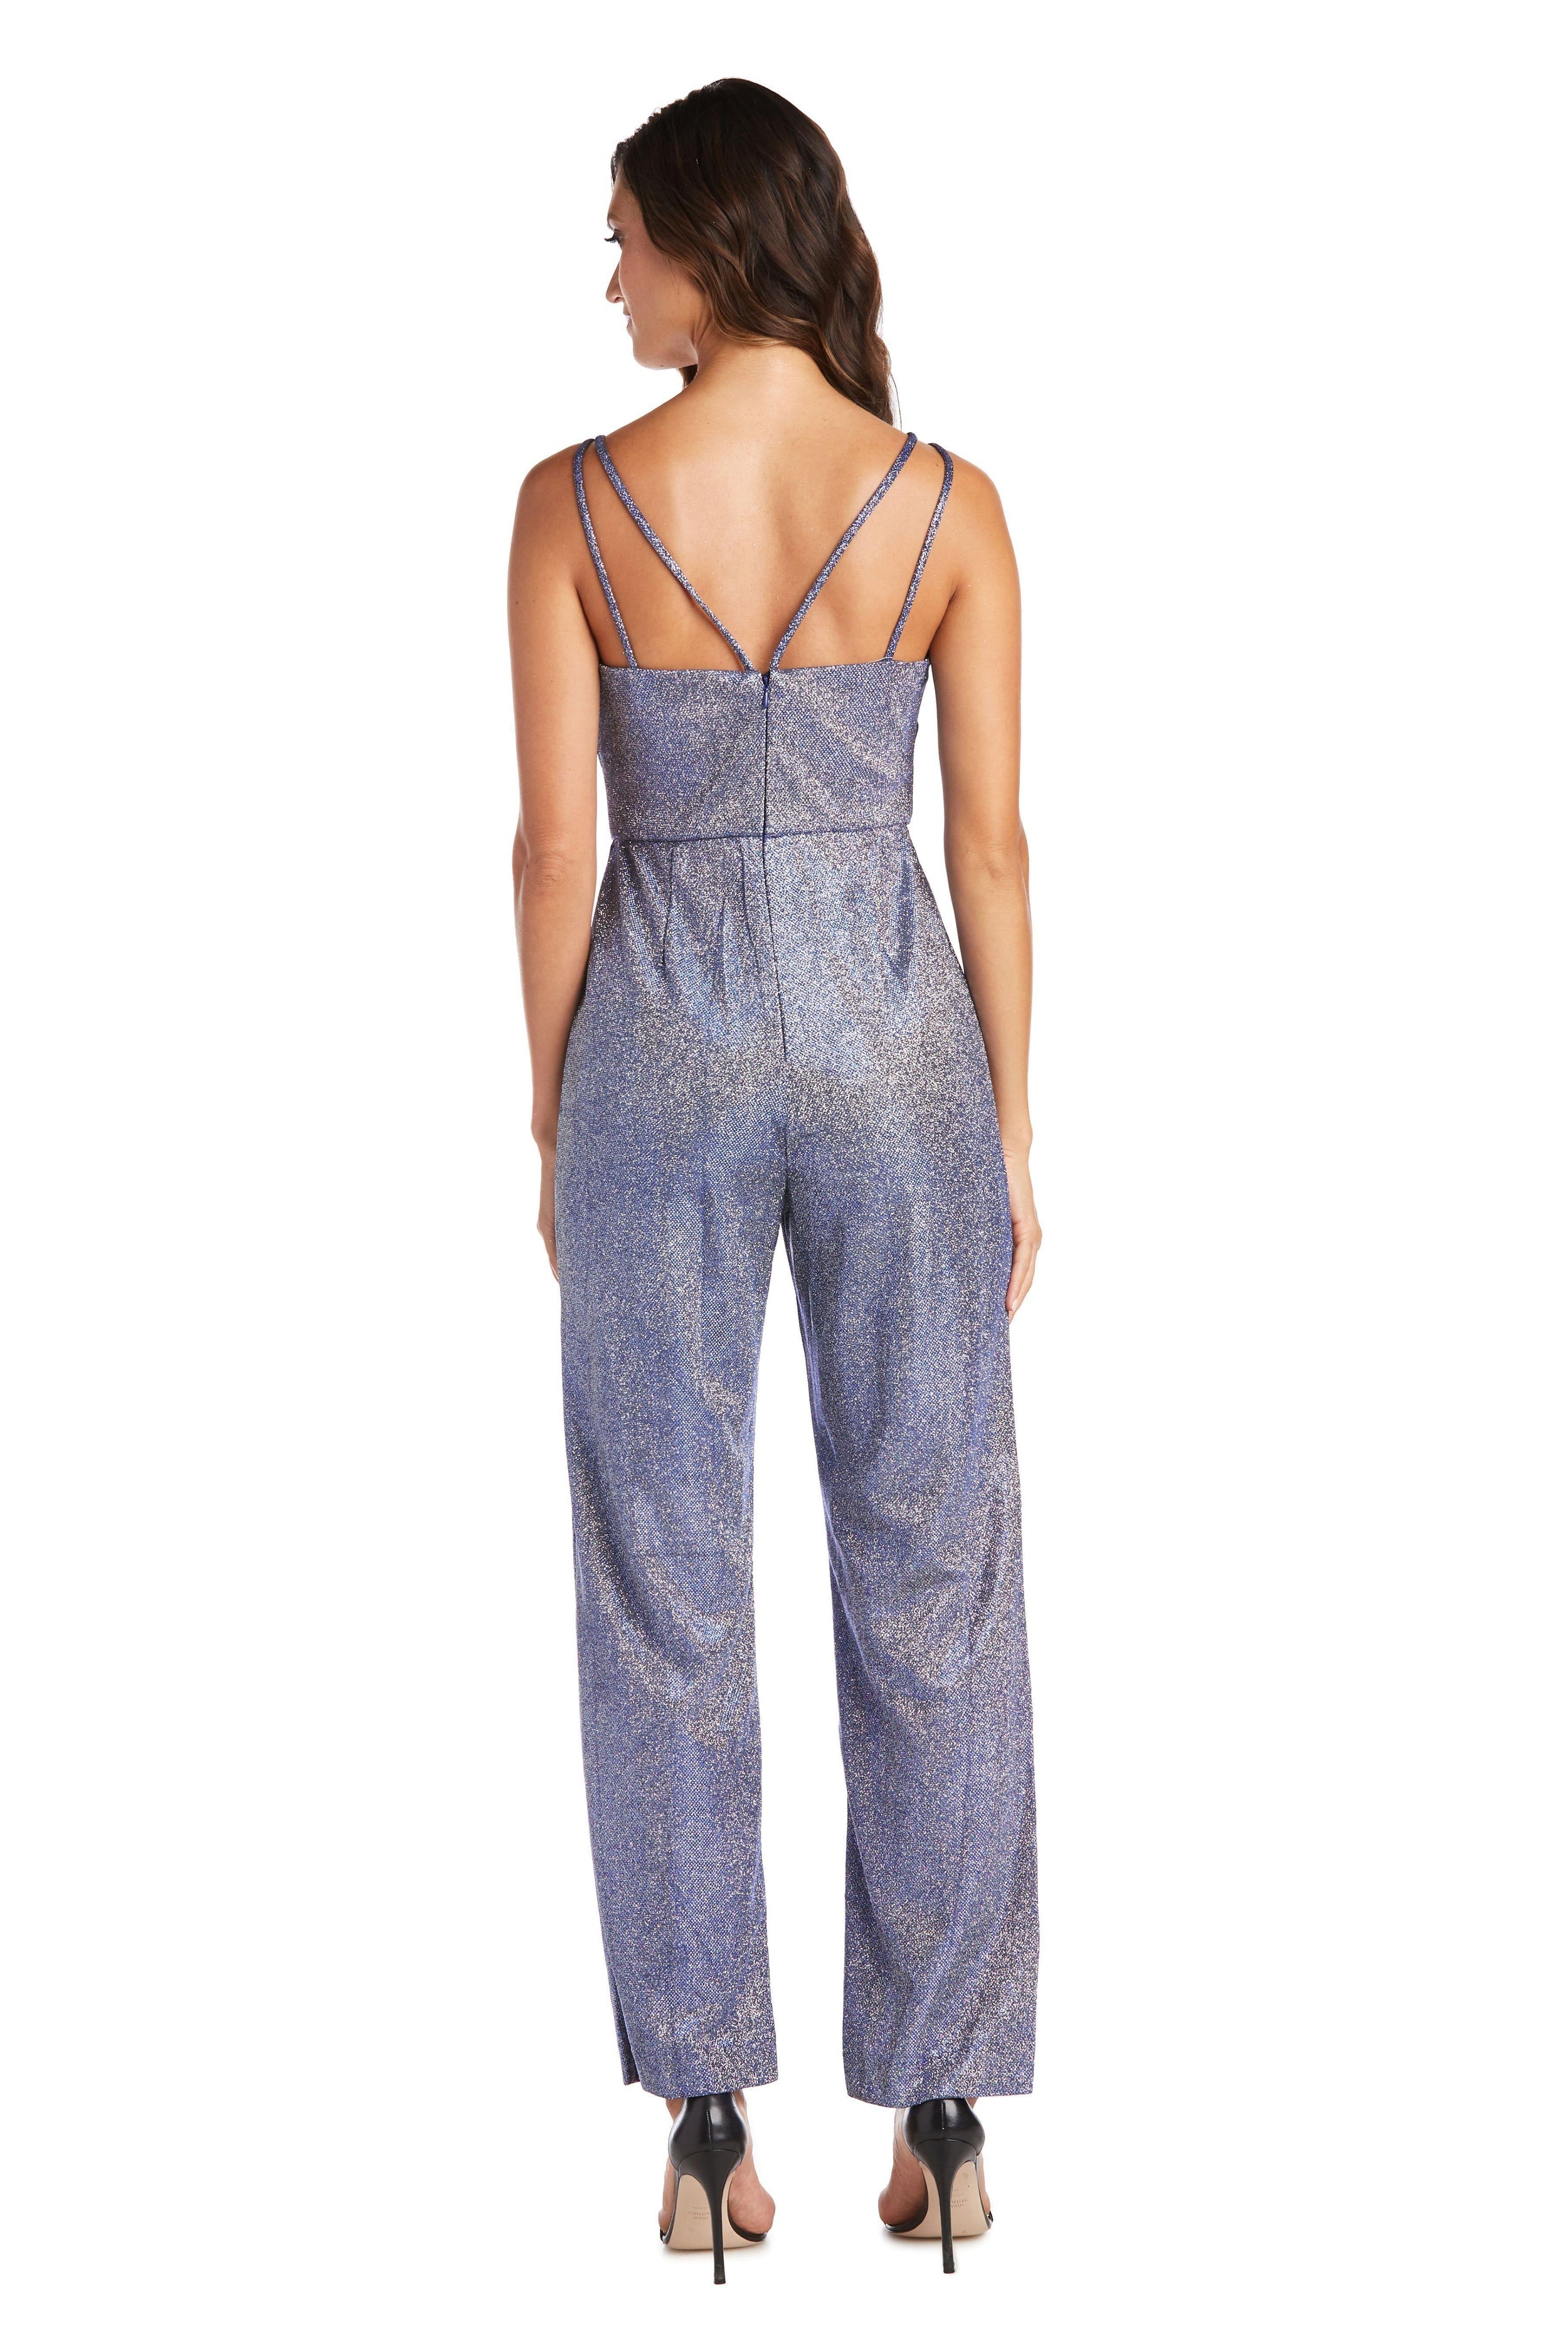 Nightway Long Formal Petite Jumpsuit 21950P - The Dress Outlet